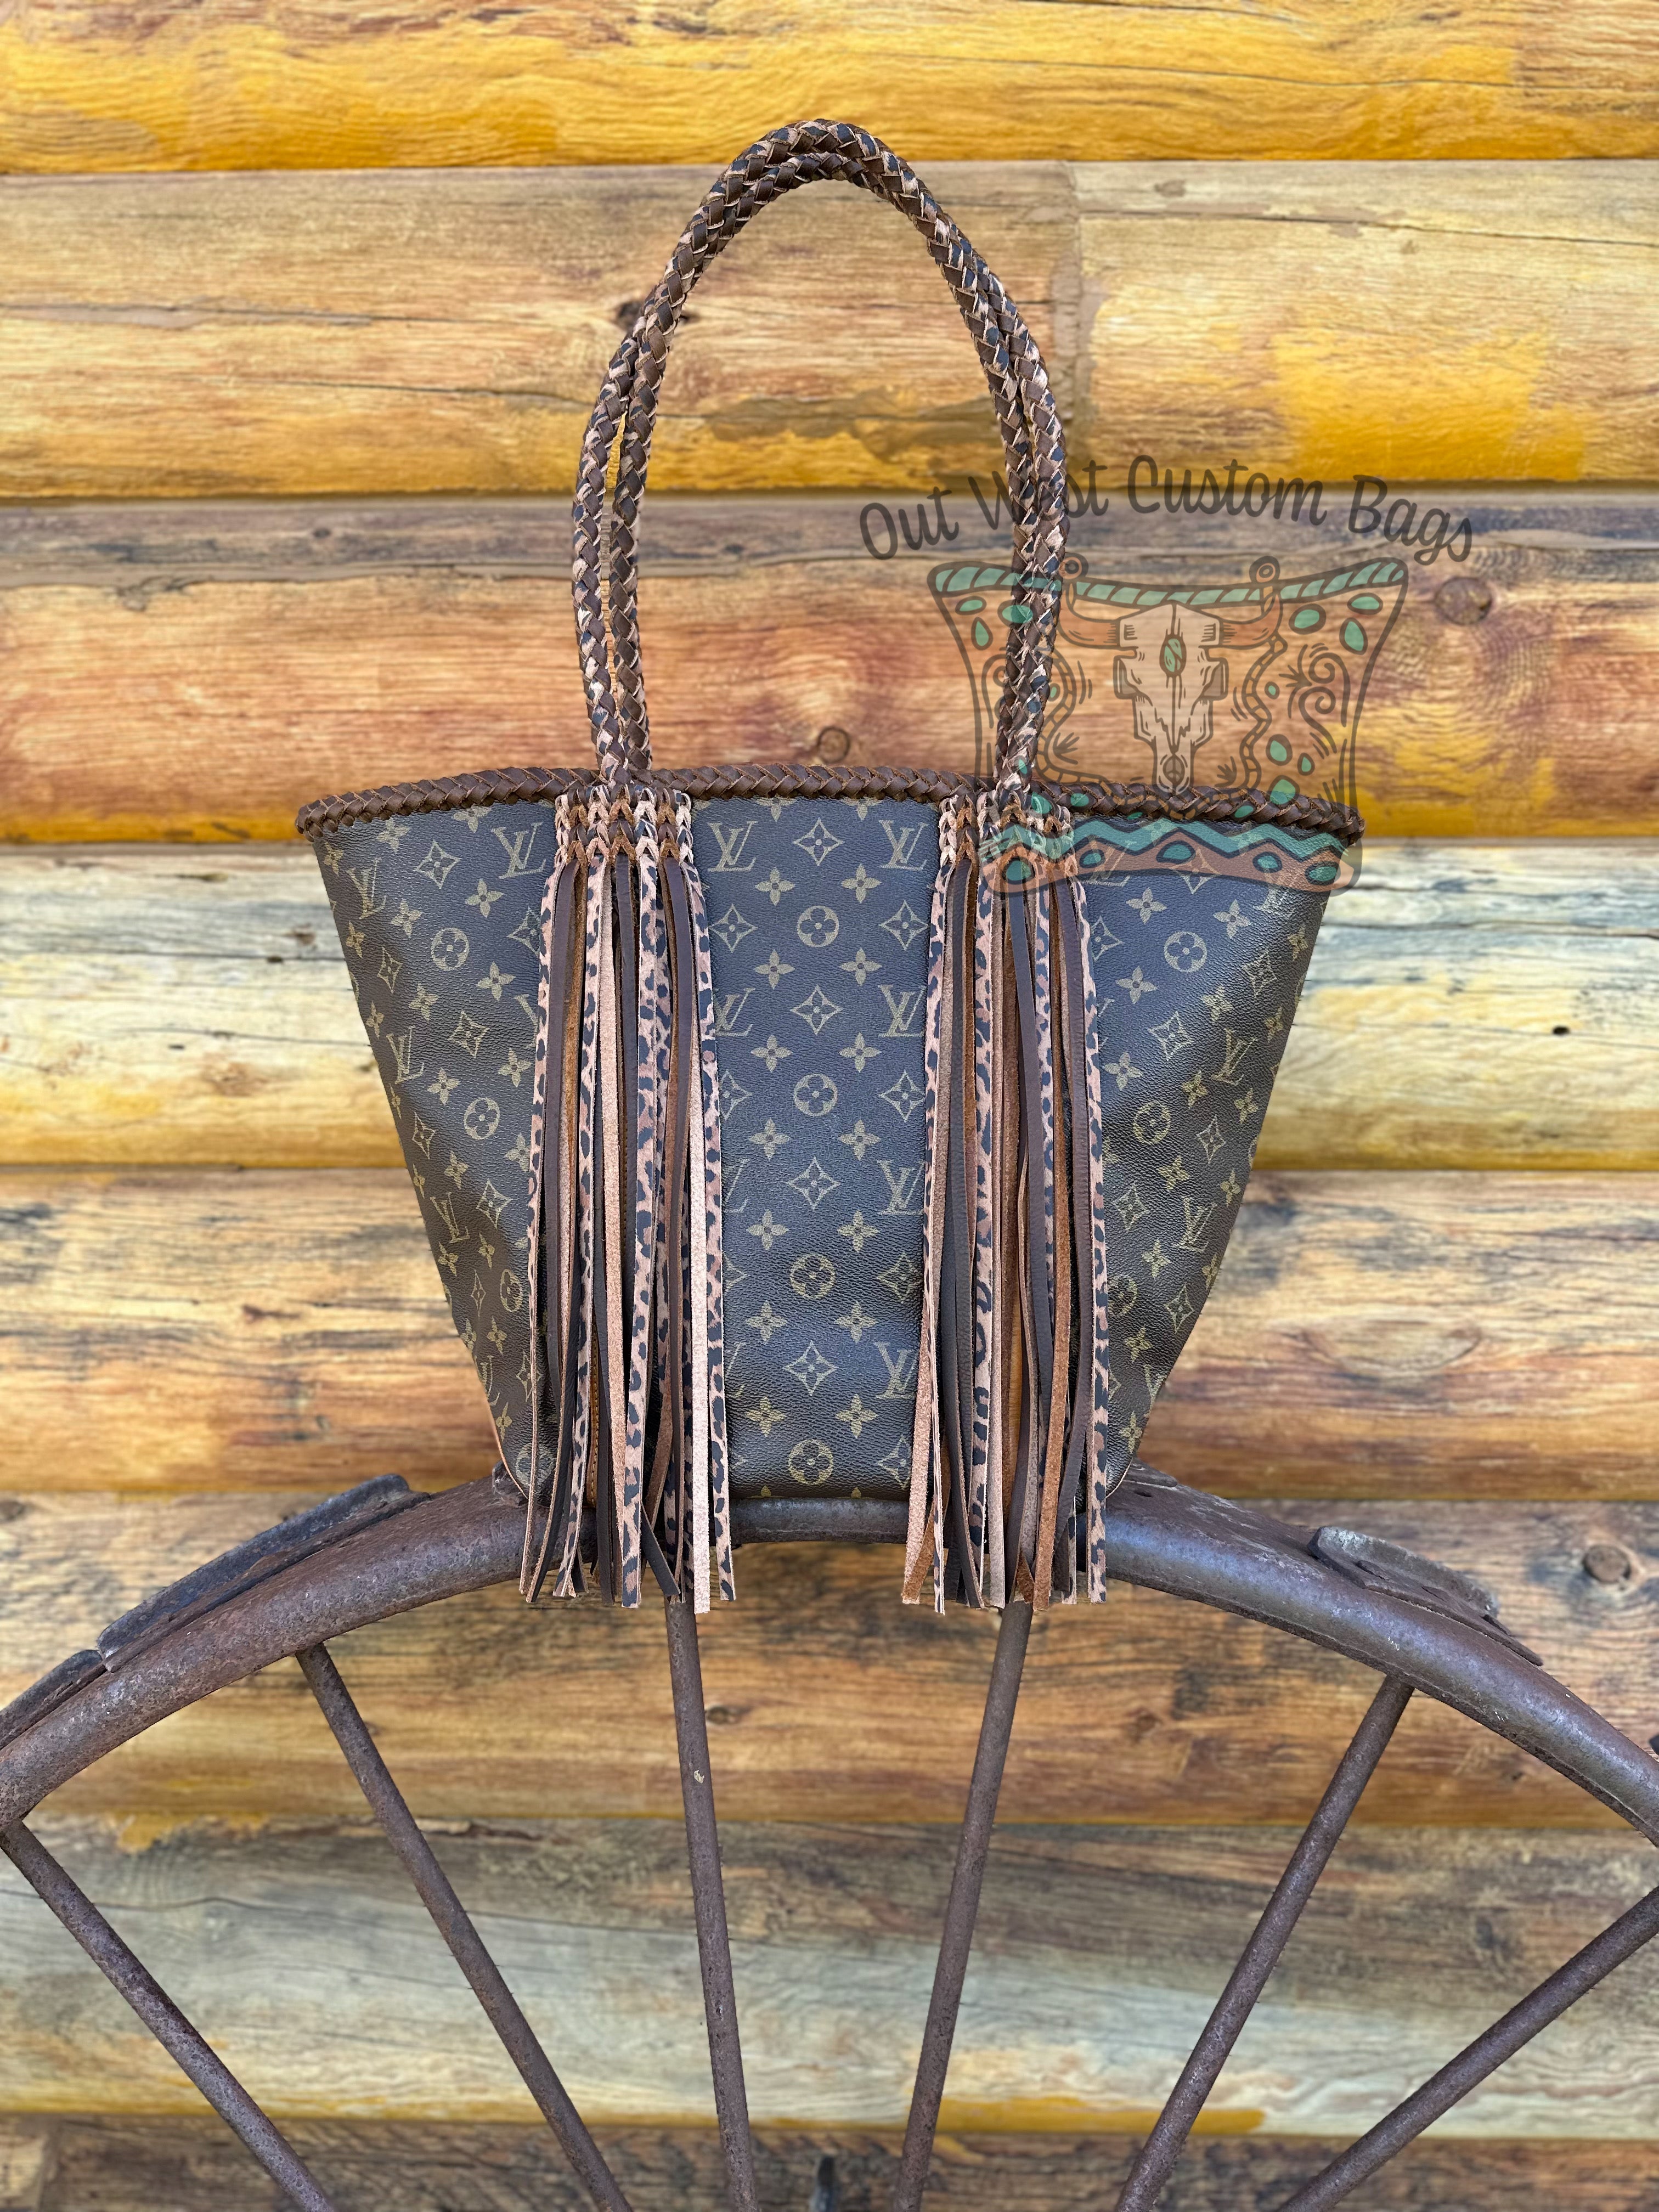 Out West Neverfull GM Revamped Extended Straps Leather Fringe – Out West  Custom Bags